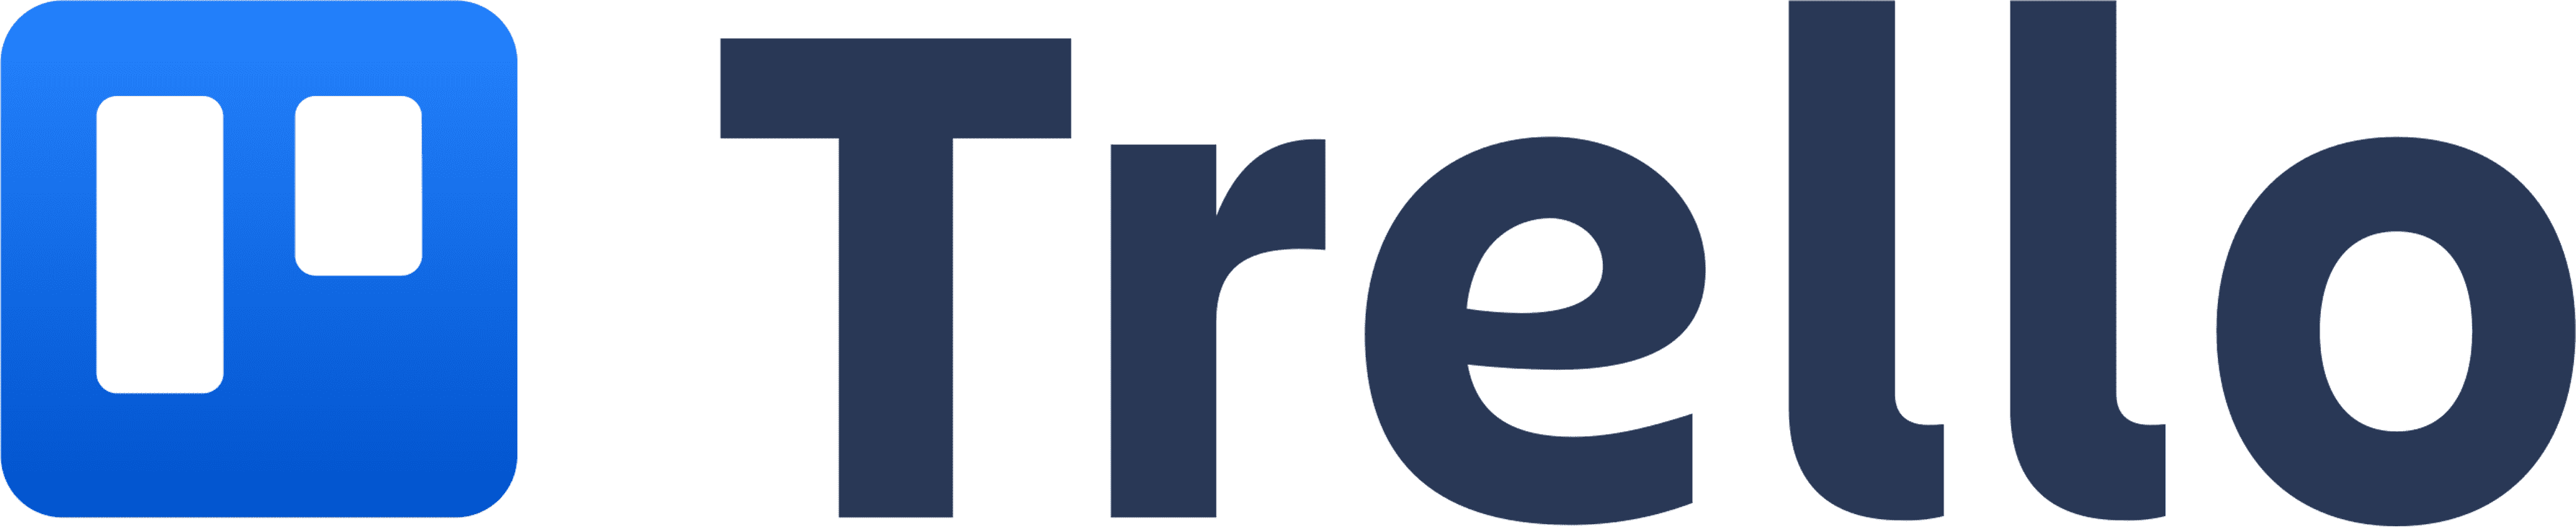 Trello, one of the best Asana alternatives, specializes in kanban boards